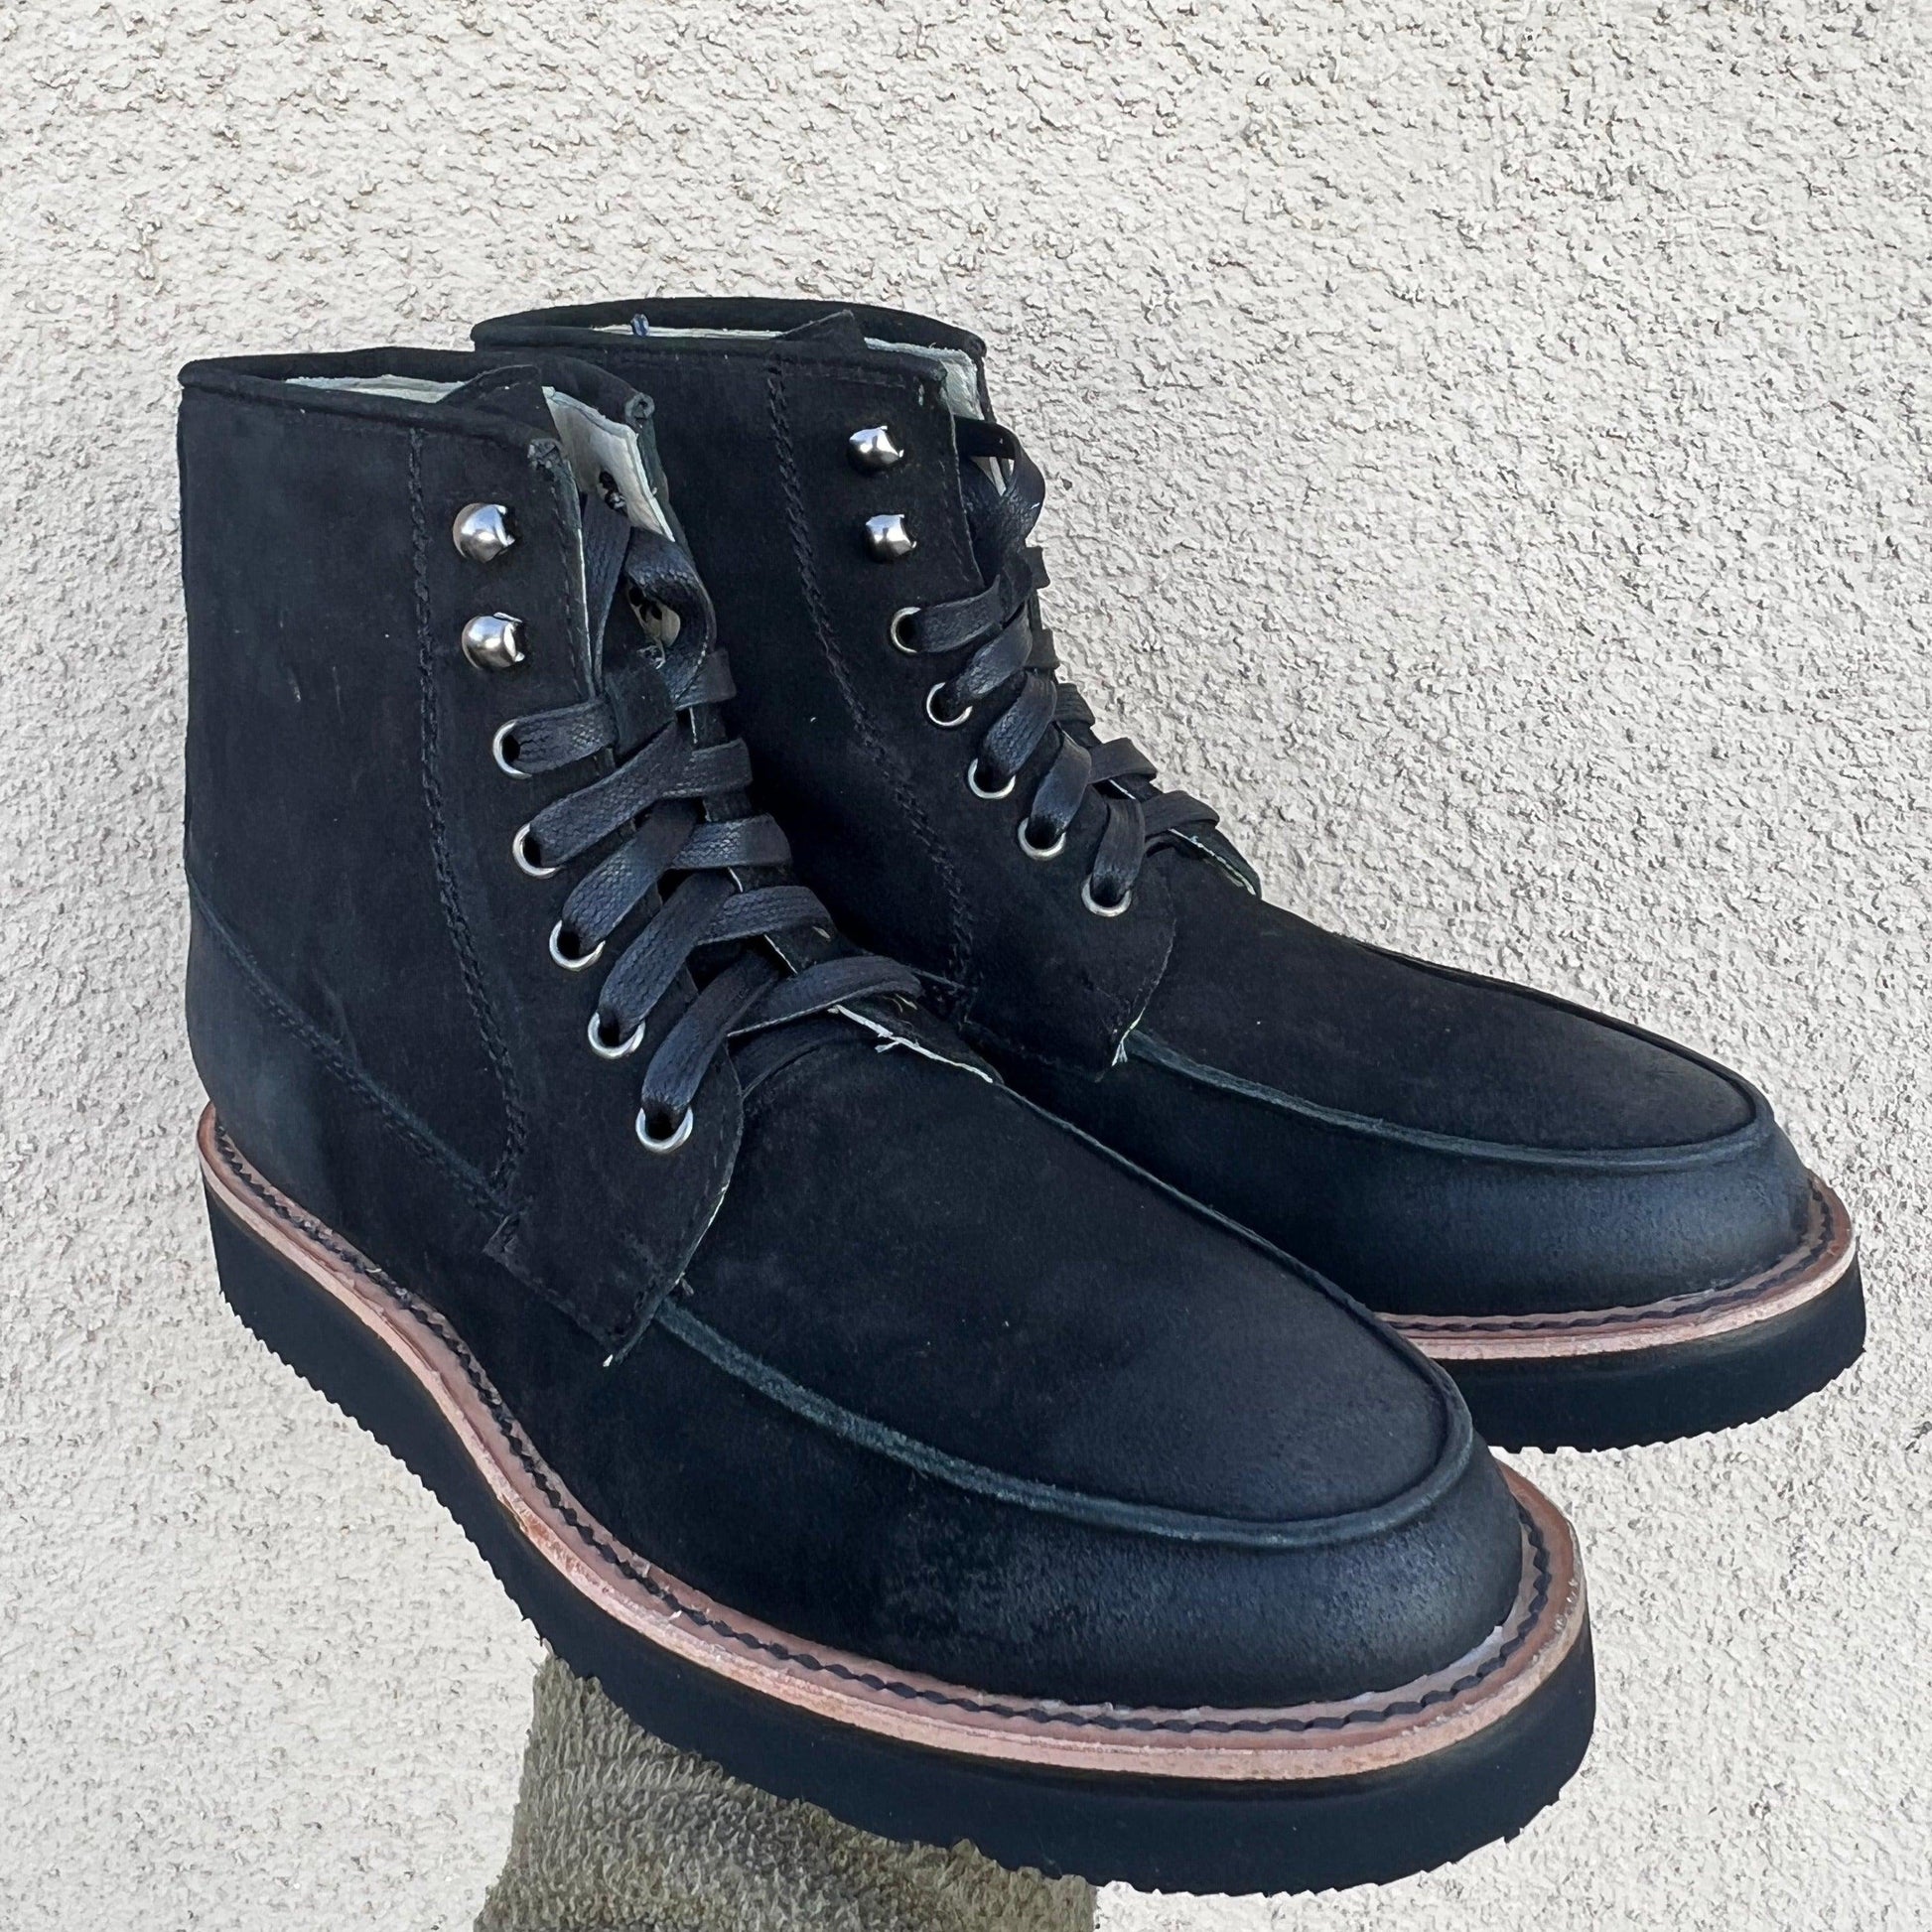 Waxed Suede Midnight Nomad Size 7.5 Item #0790 - DIEVIER